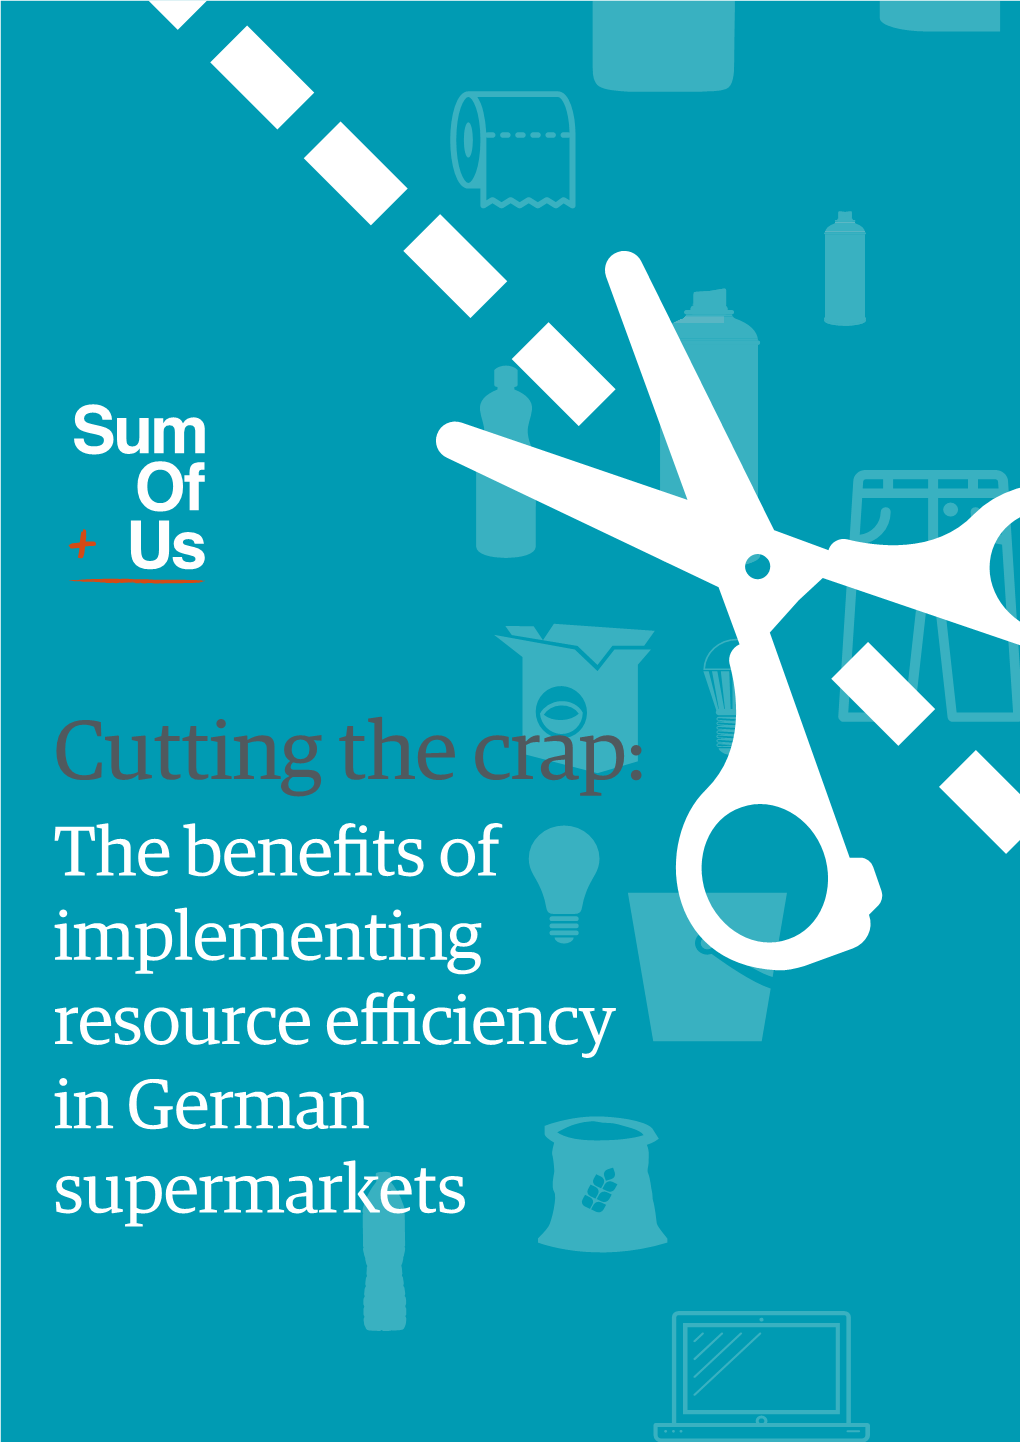 Cutting the Crap: the Benefits of Implementing Resource Efficiency in German Supermarkets This Is a Sumofus Report Based on the Research by Changing